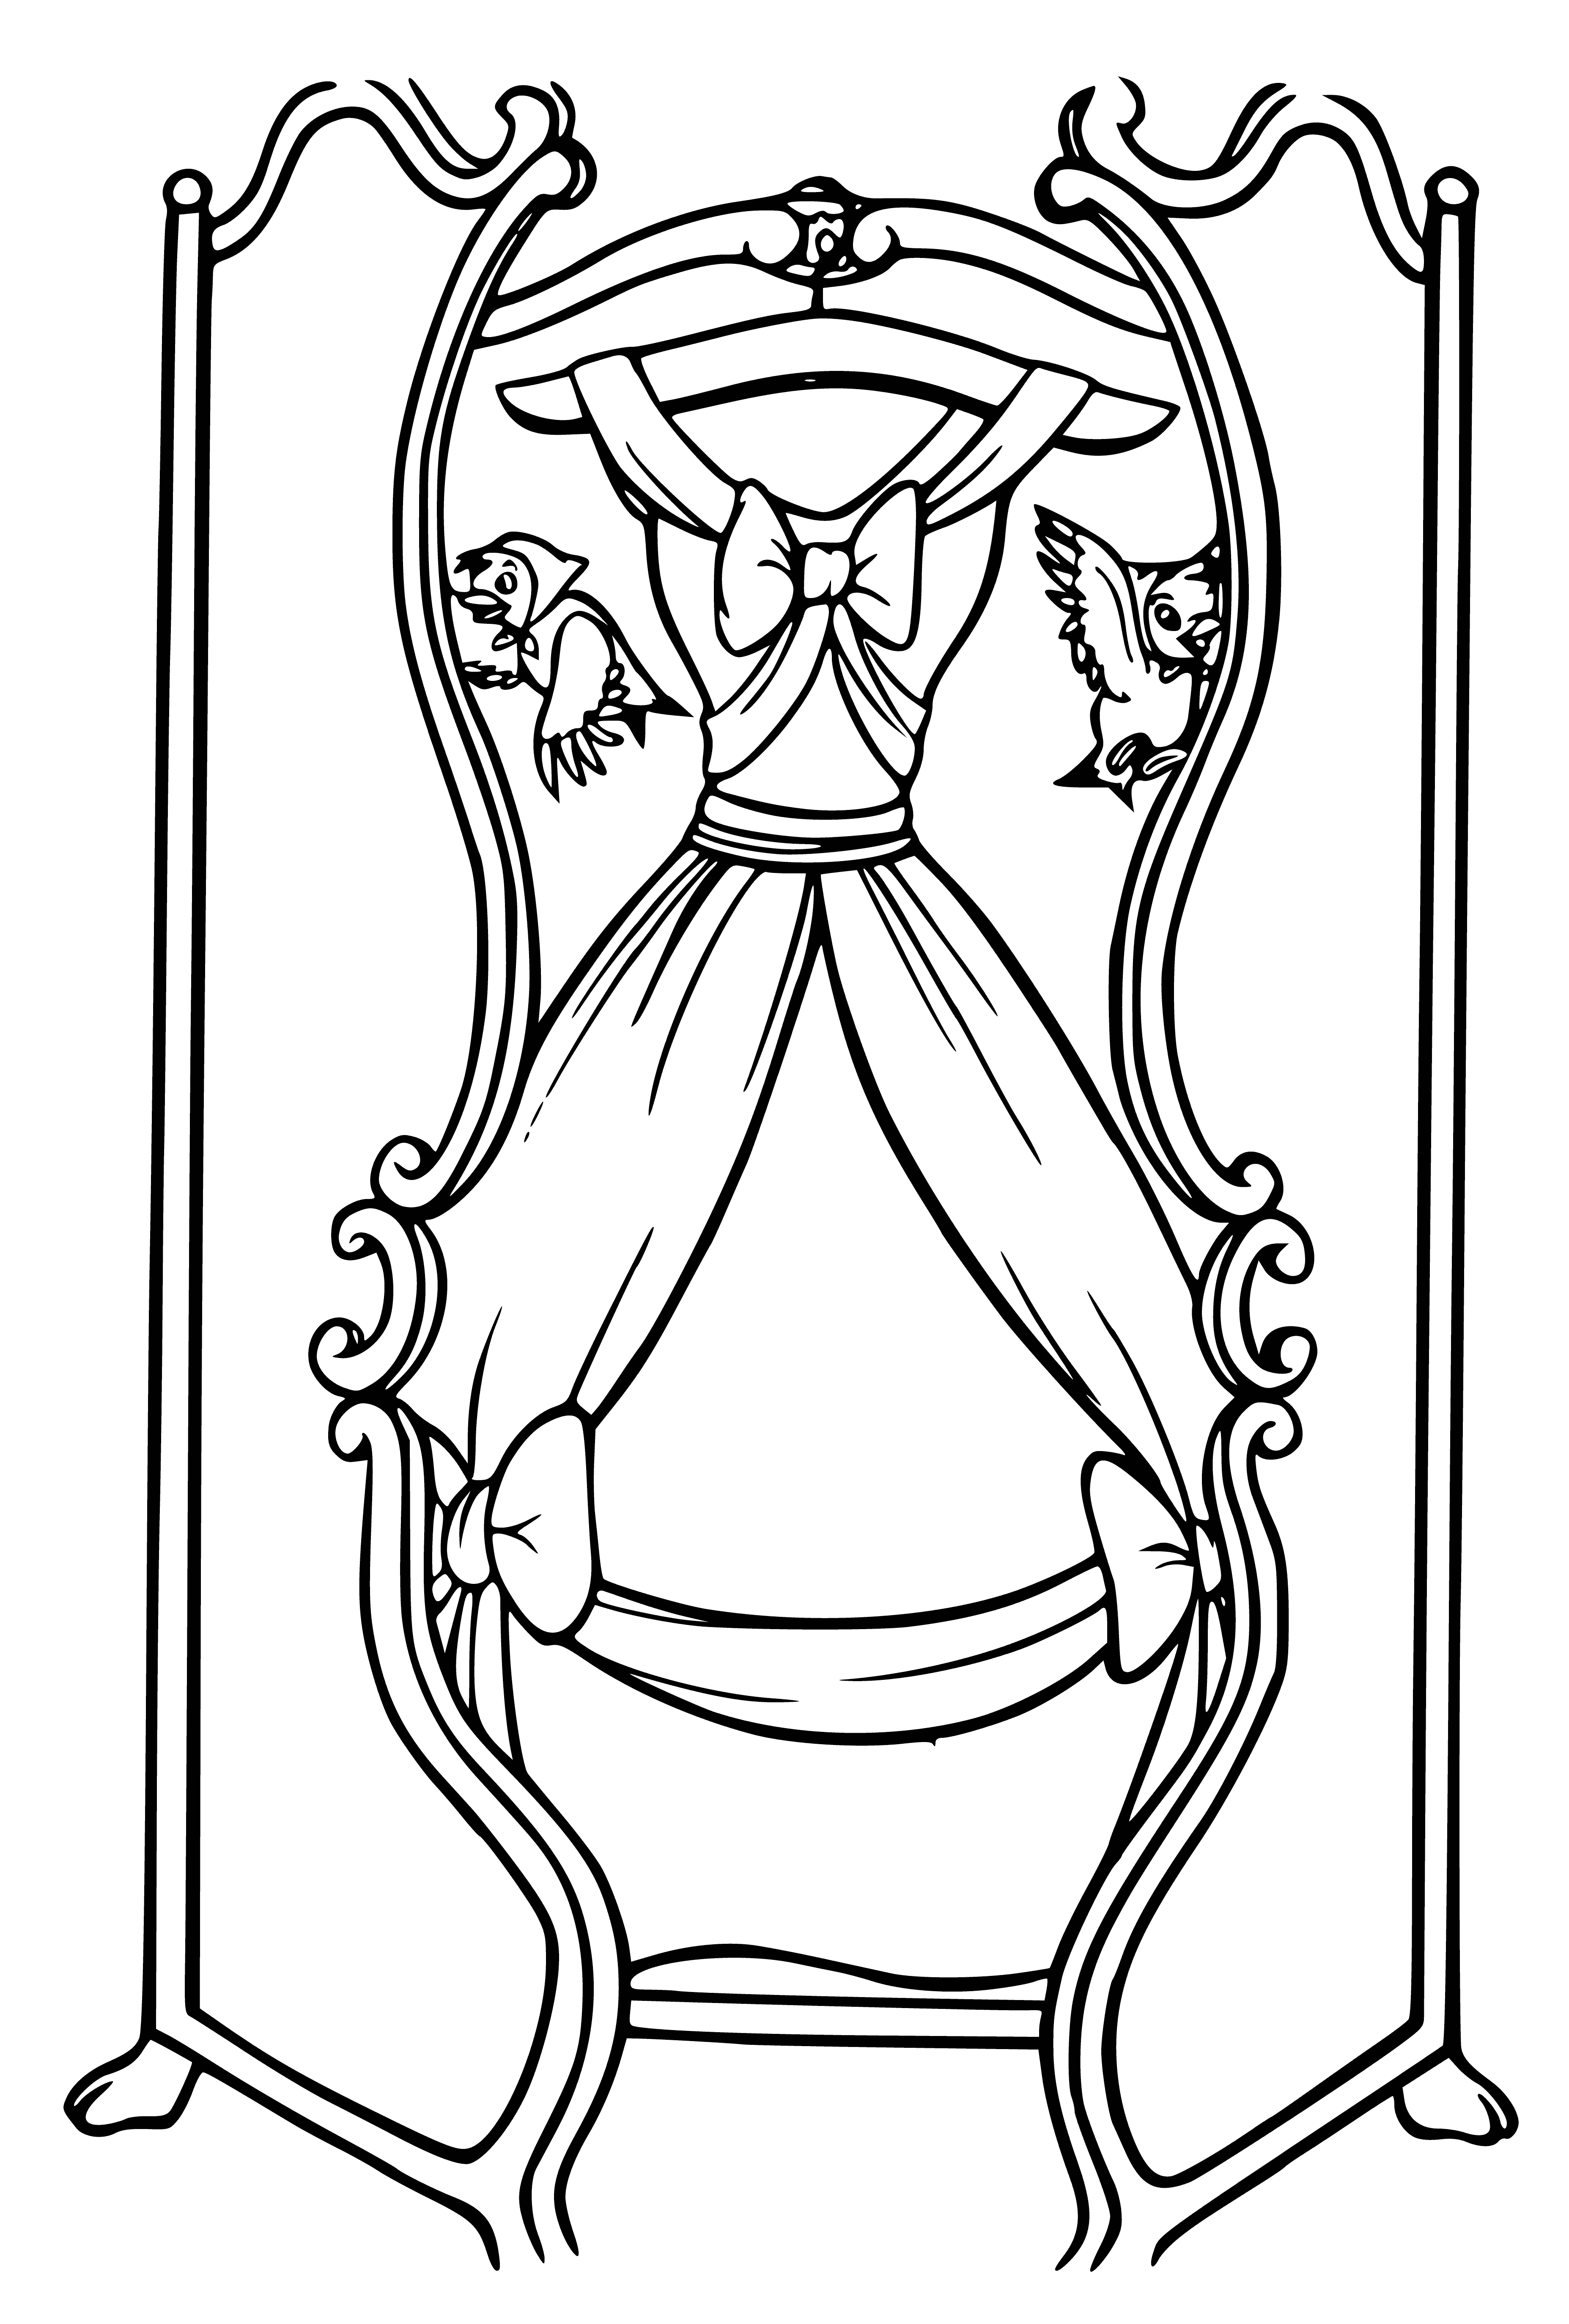 The dress coloring page